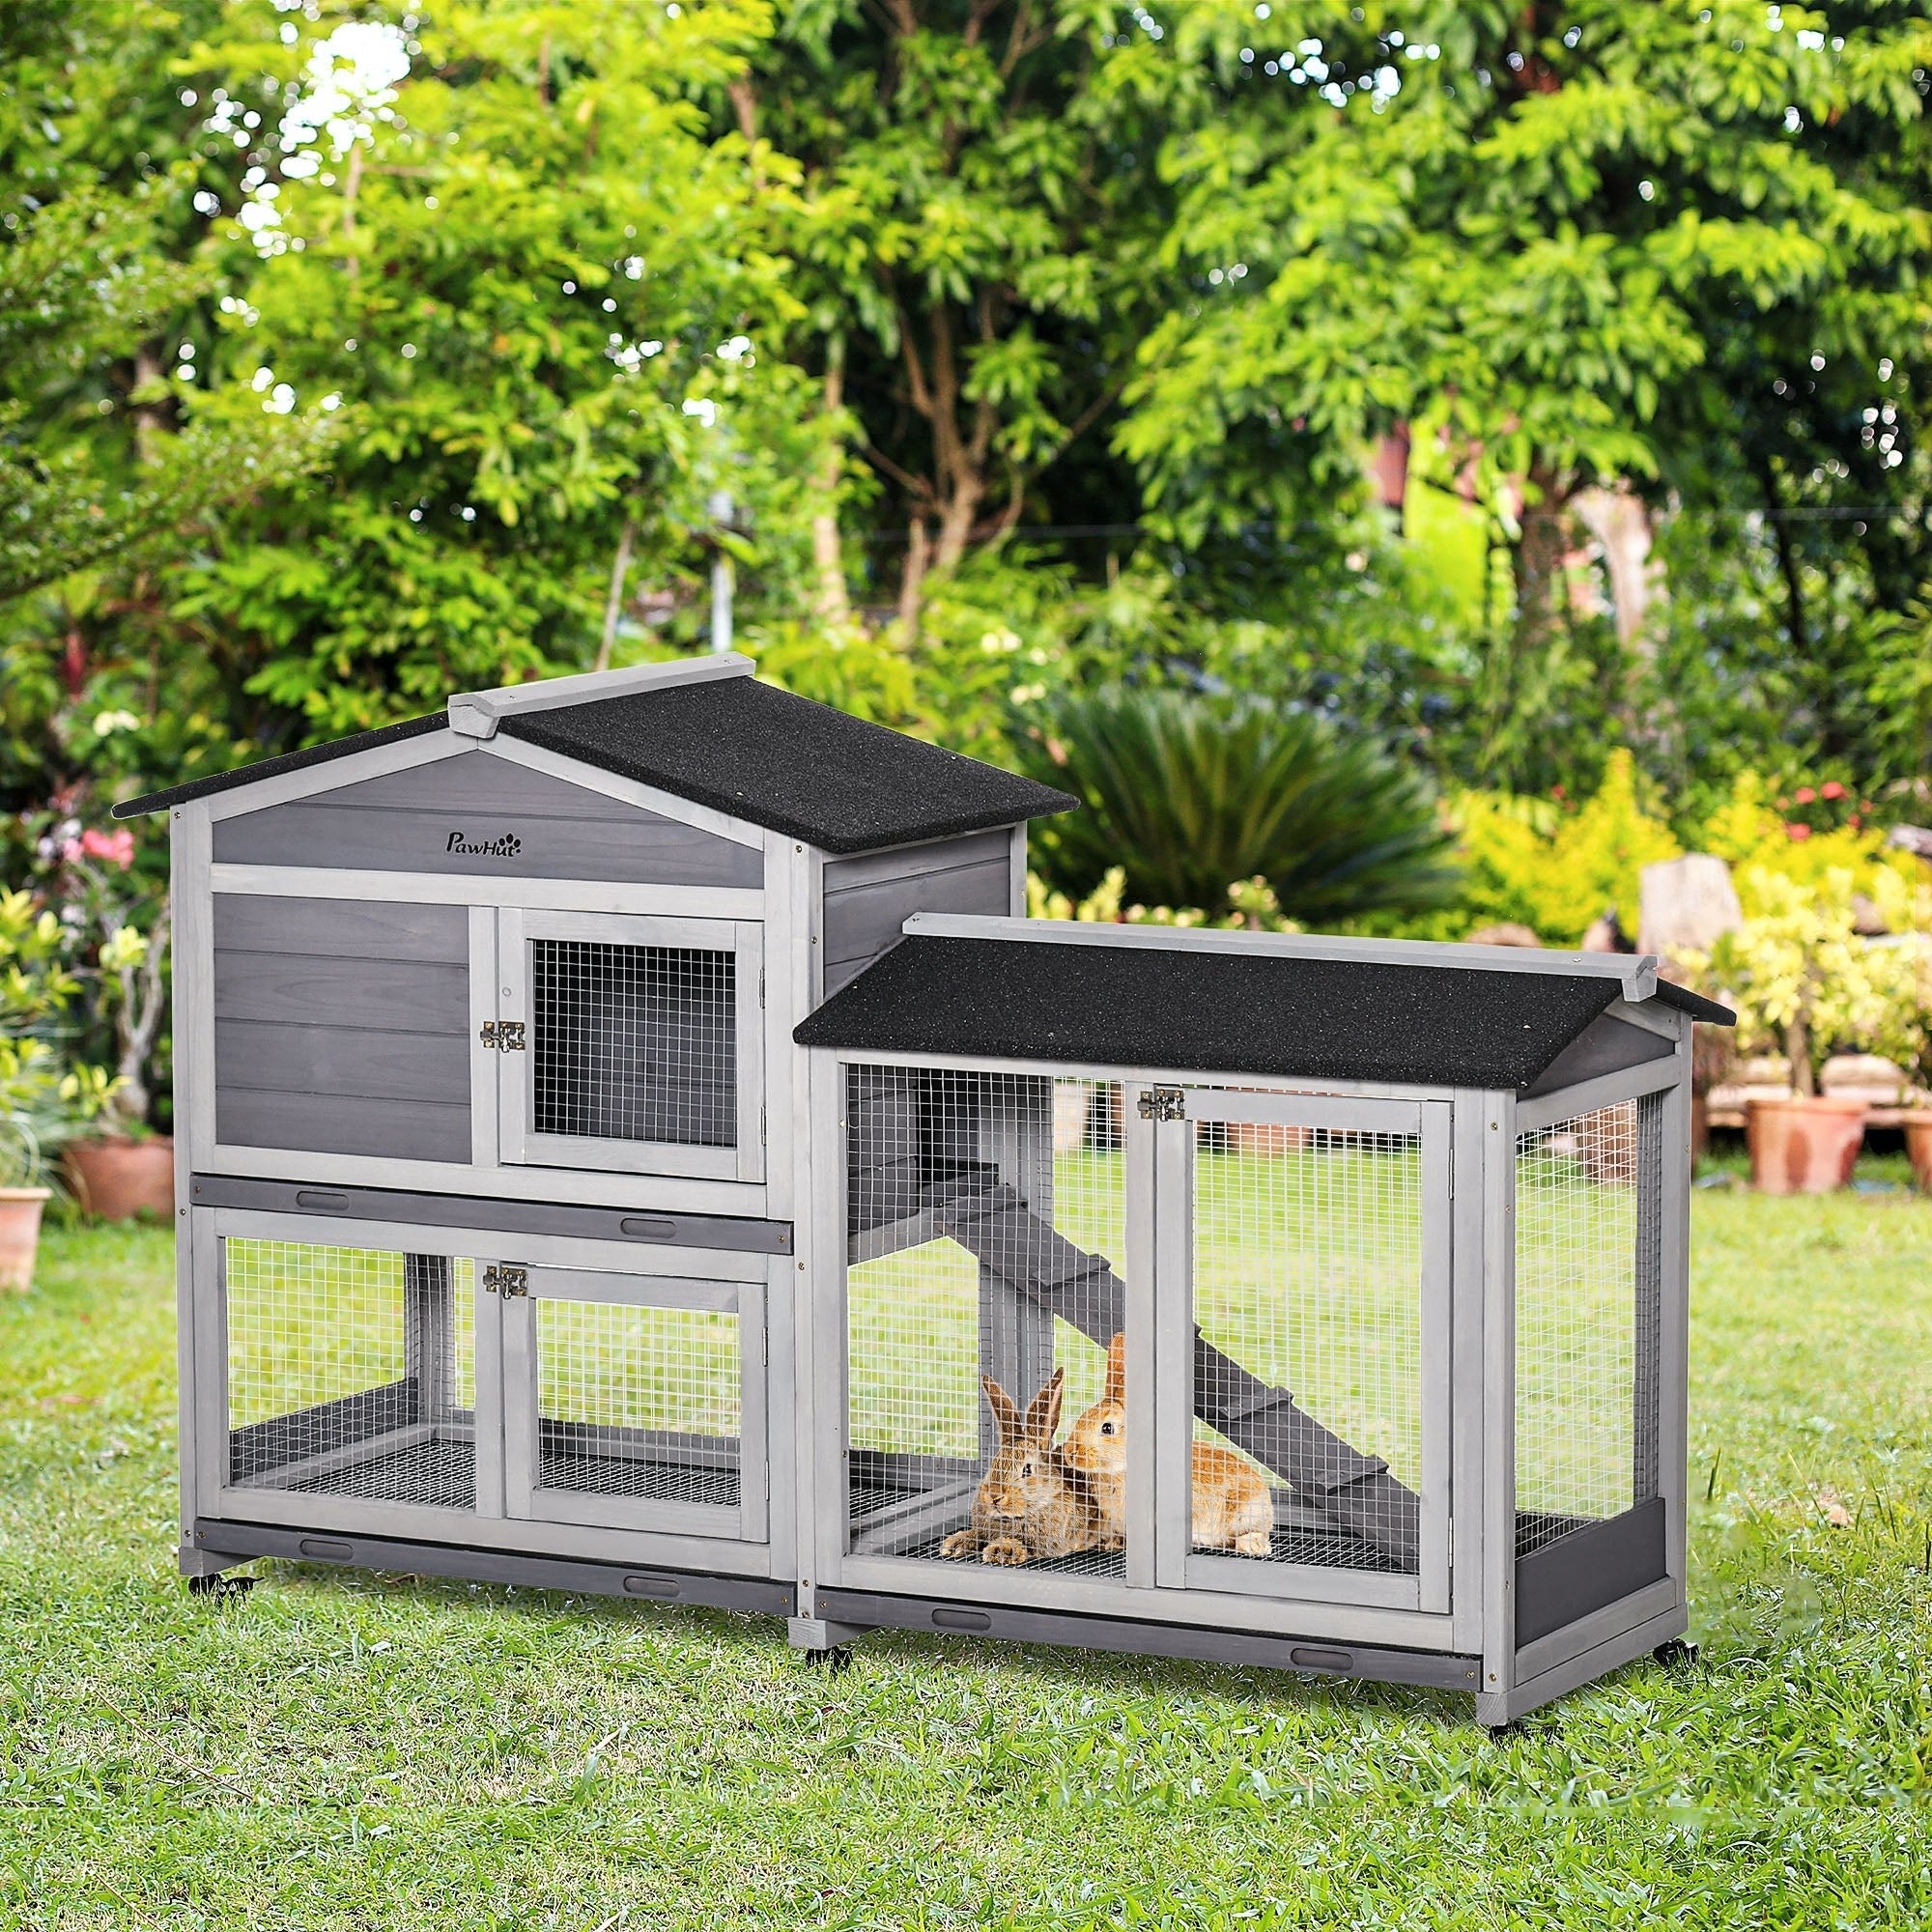 Wooden Rabbit Hutch, Guinea Pig Cage, with Wheels, Run, Slide-Out Tray, Ramp, PawHut, Grey